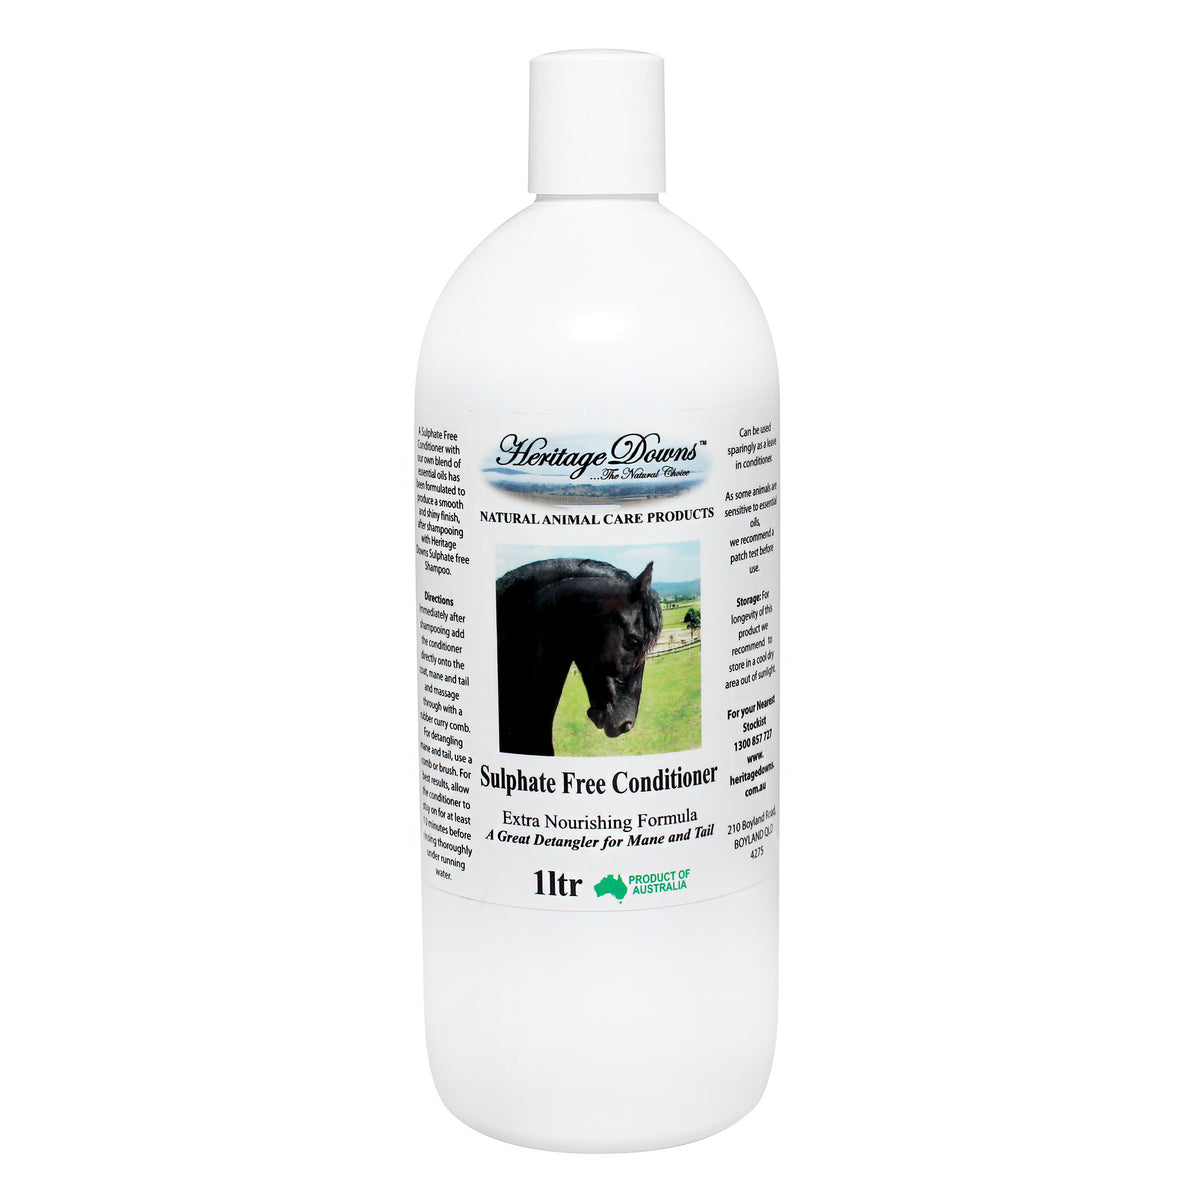 Heritage Downs Sulphate Free Conditioner